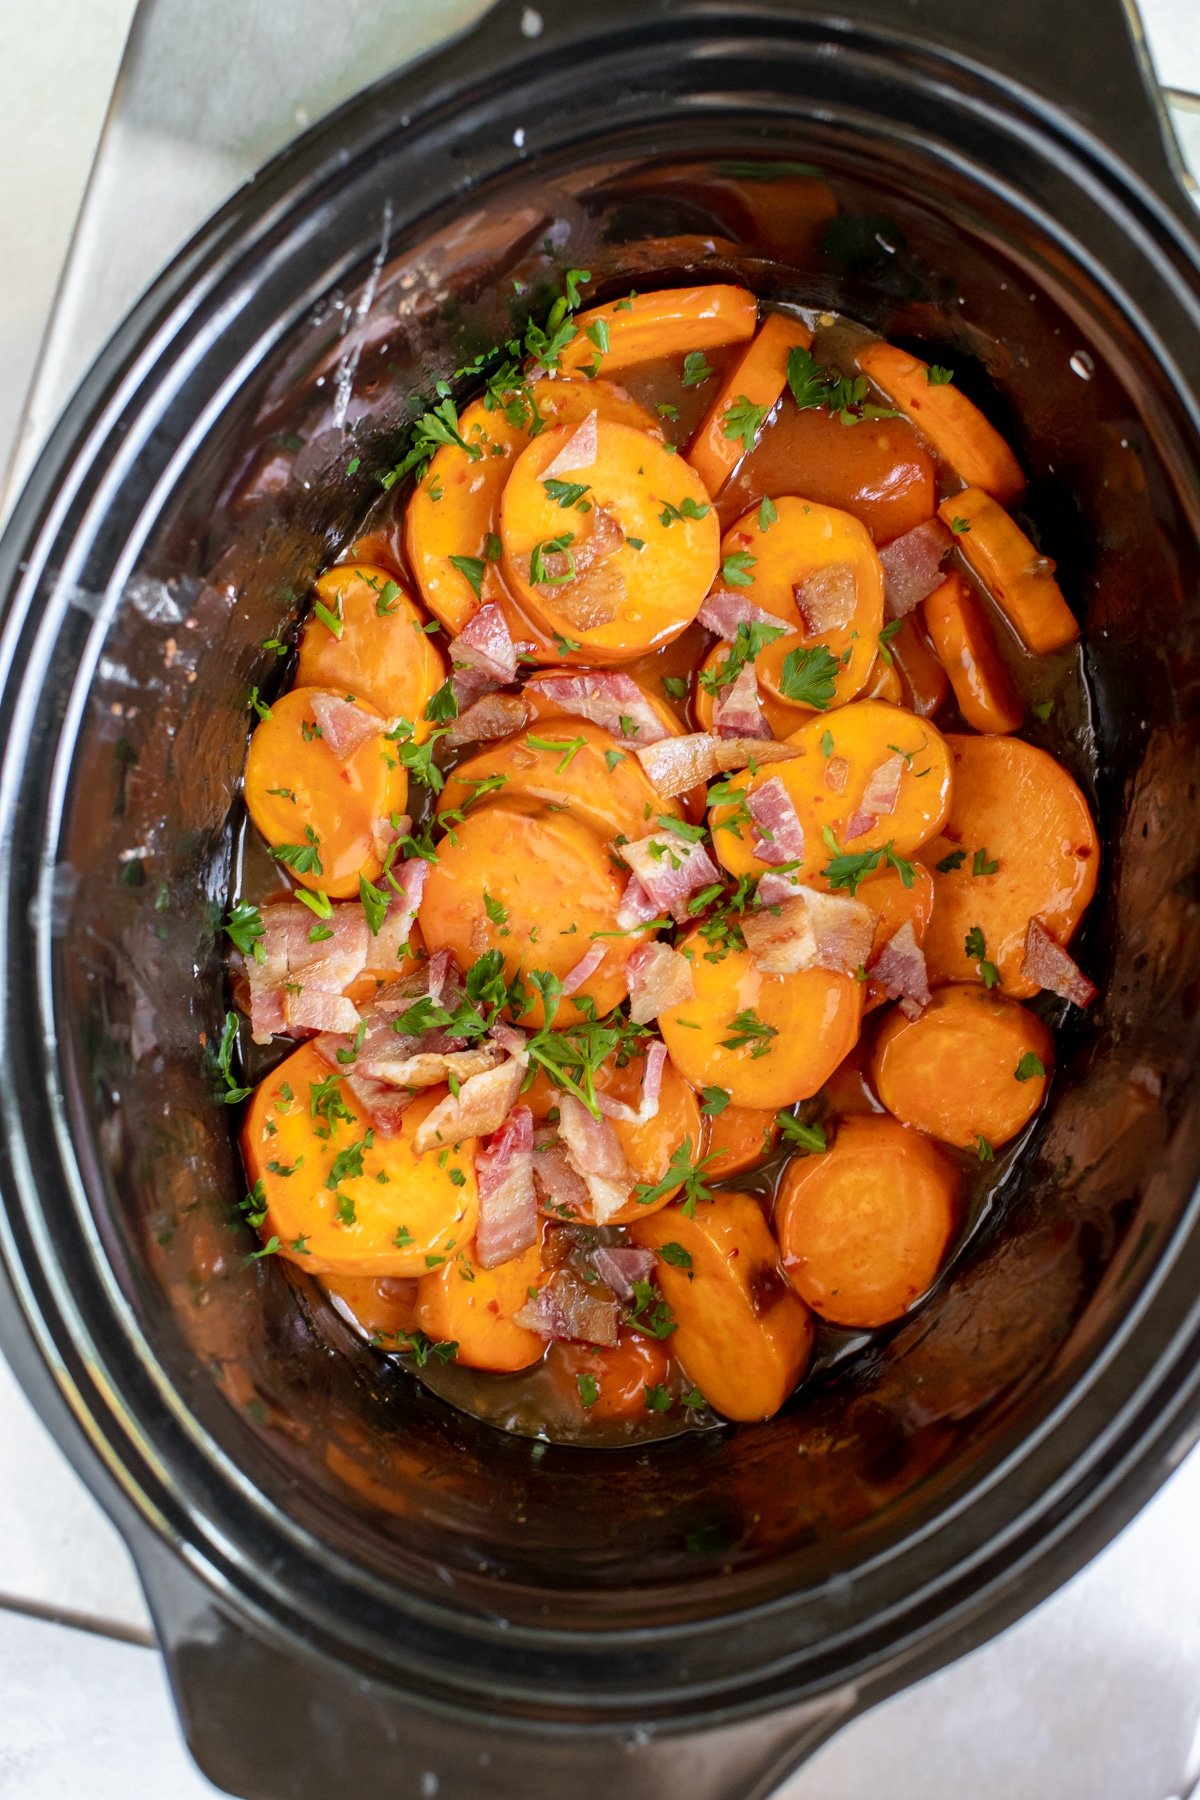 sweet potatoes sliced into rounds, in a black crock pot topped with bacon crumbles and parsley